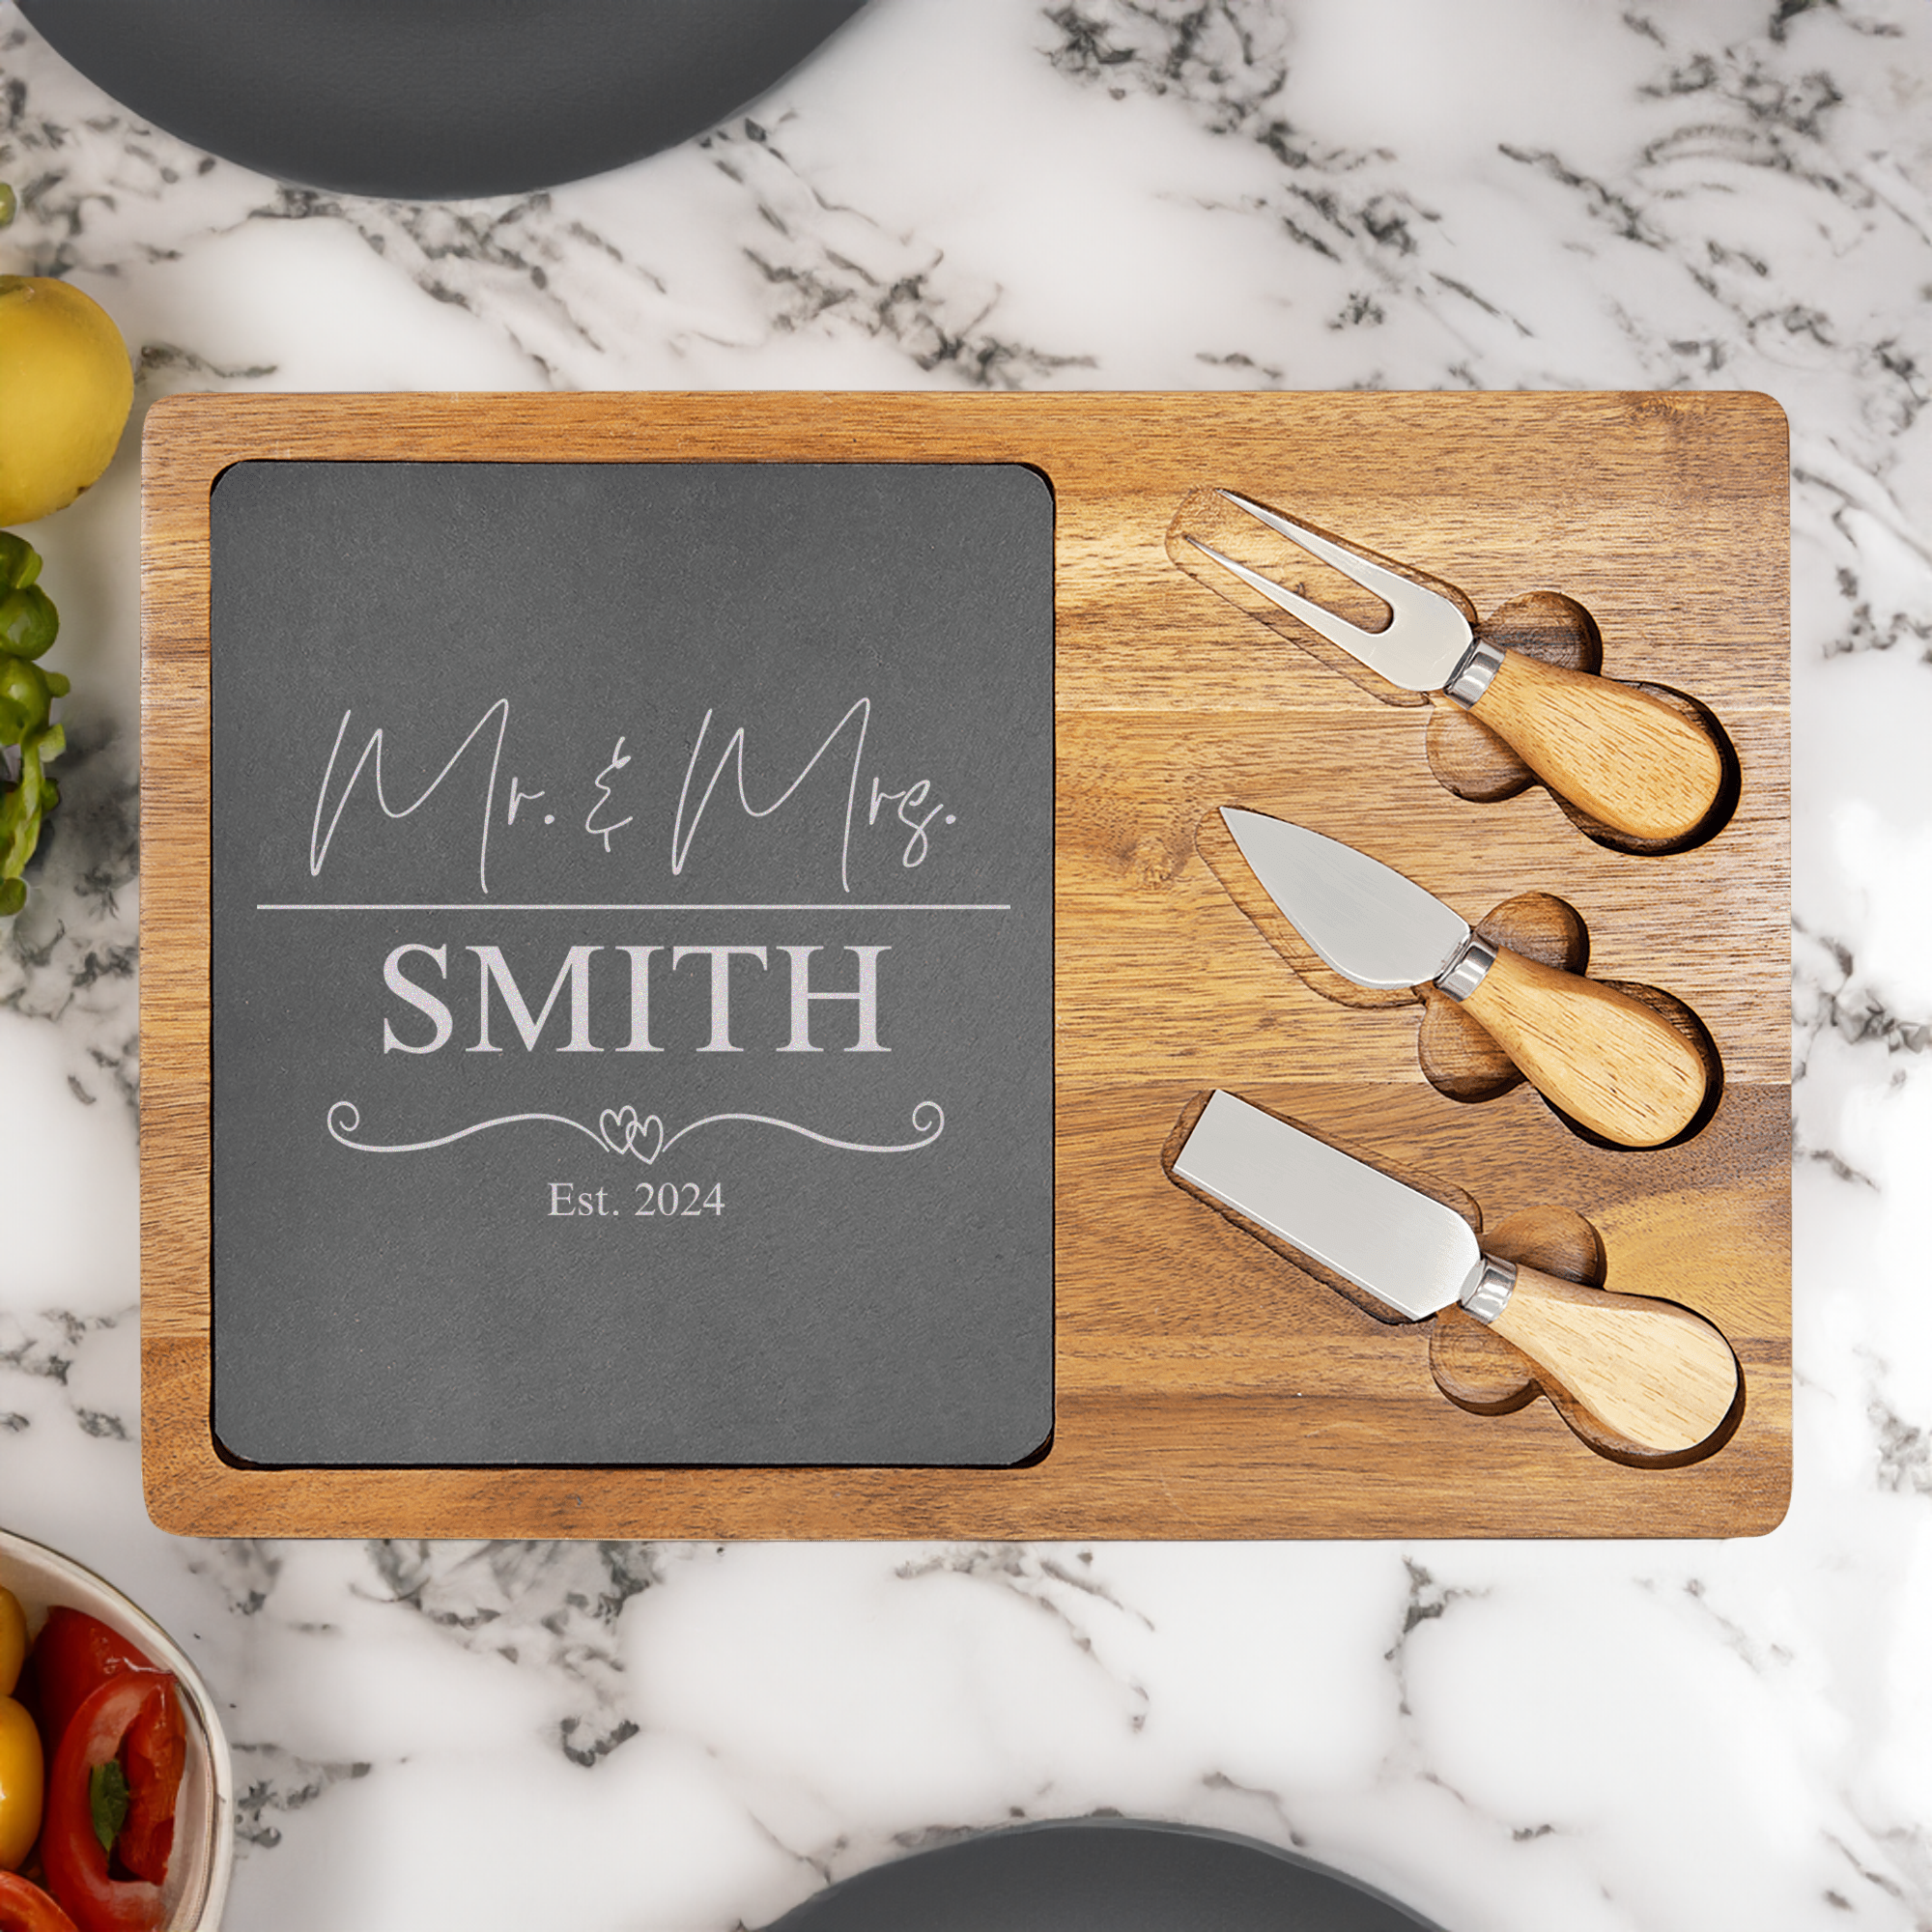 Shared Journey Wood Slate Serving Tray